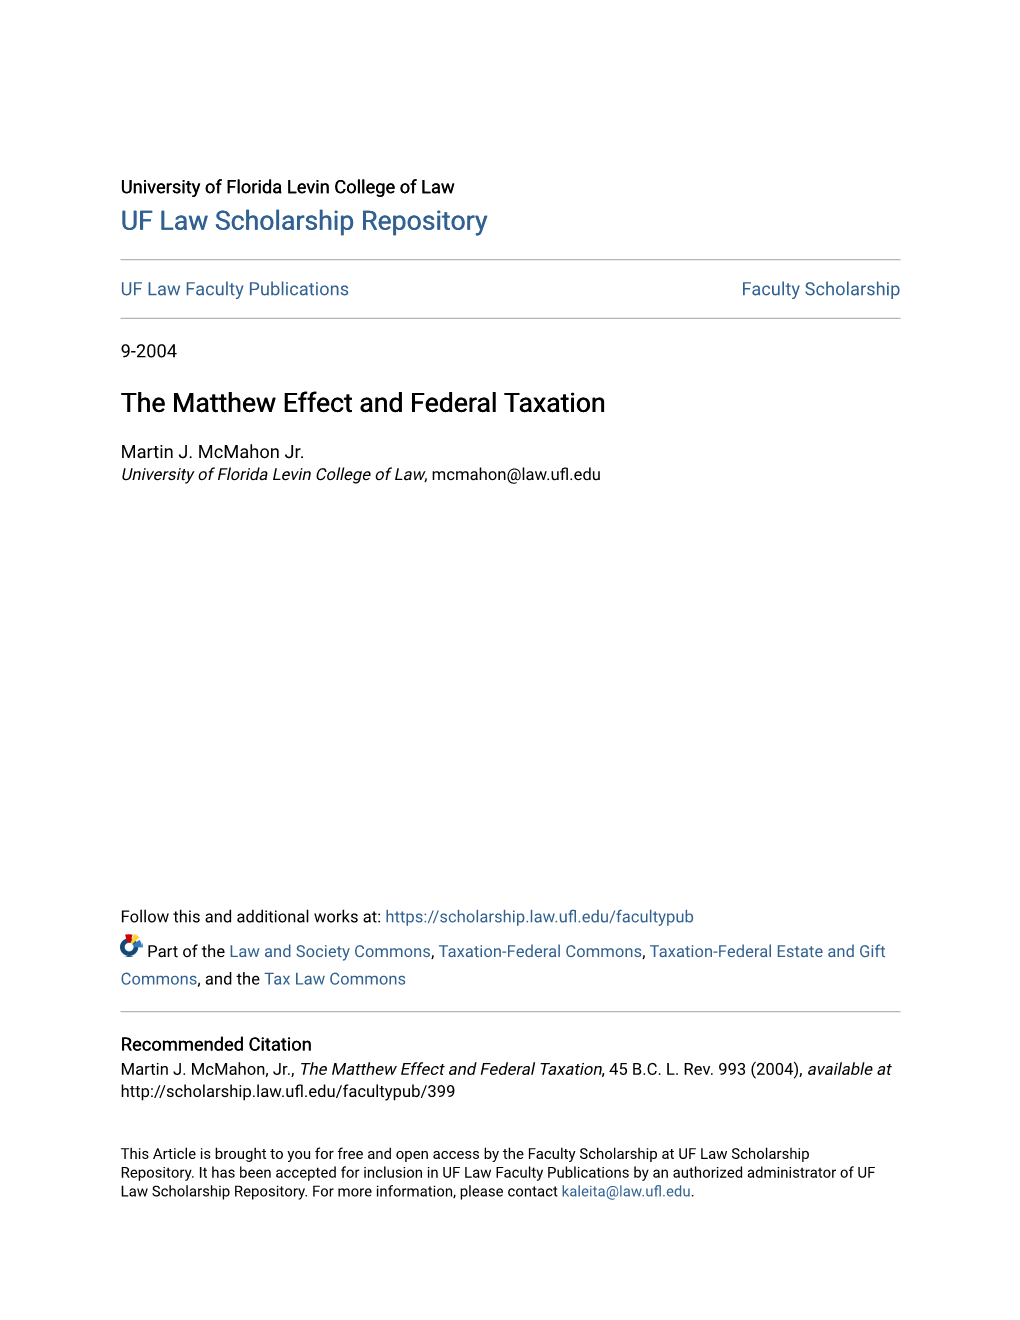 The Matthew Effect and Federal Taxation